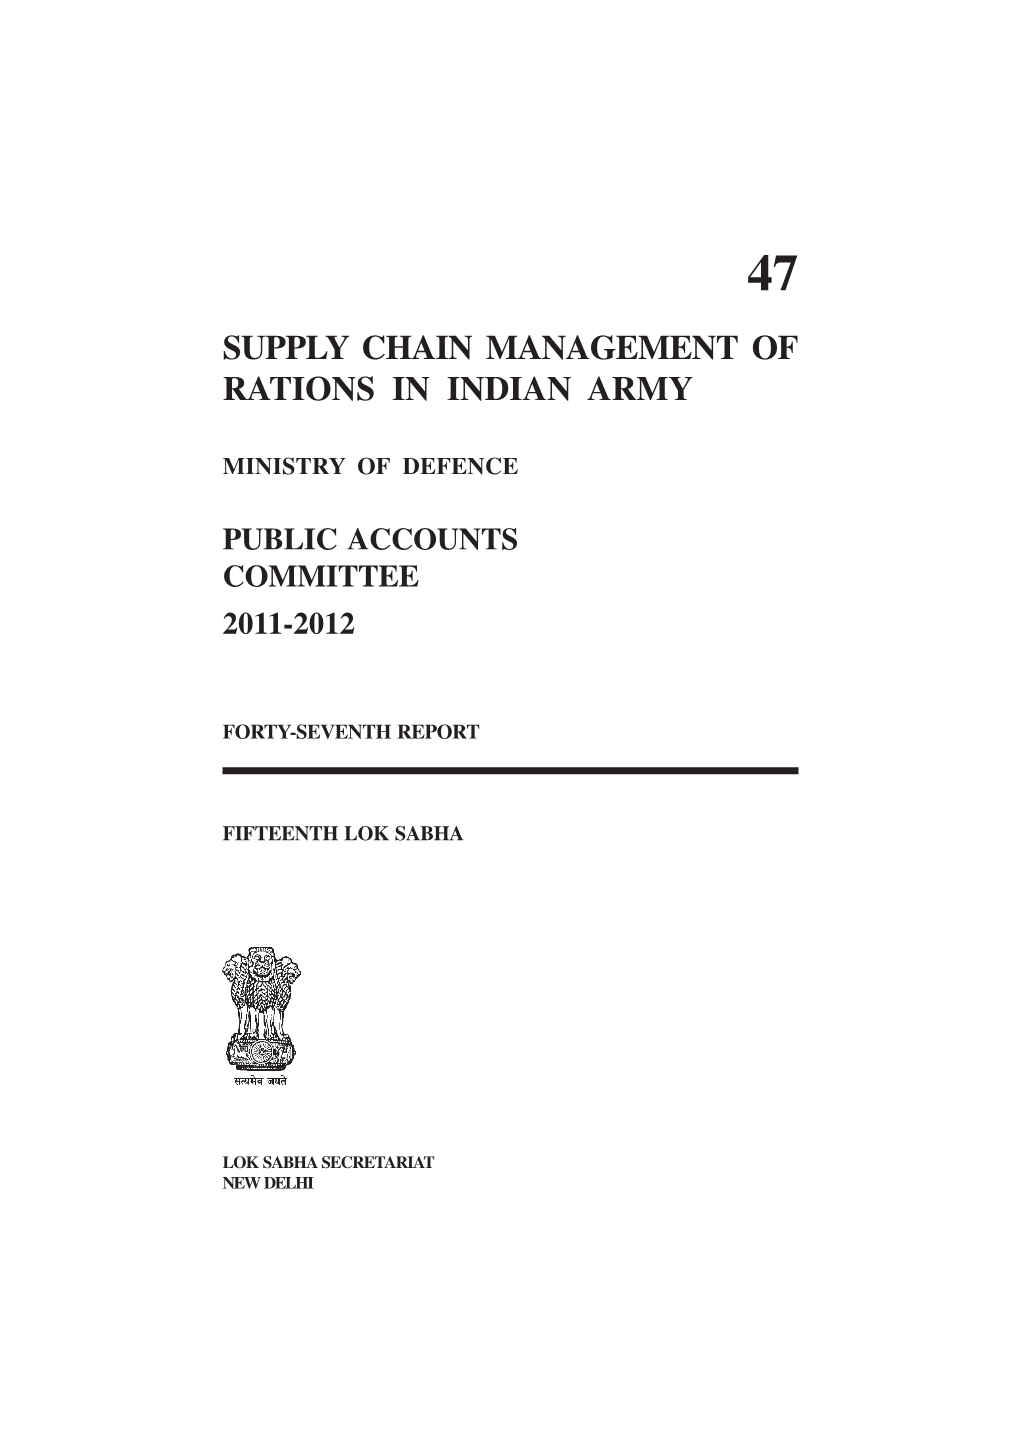 Supply Chain Management of Rations in Indian Army